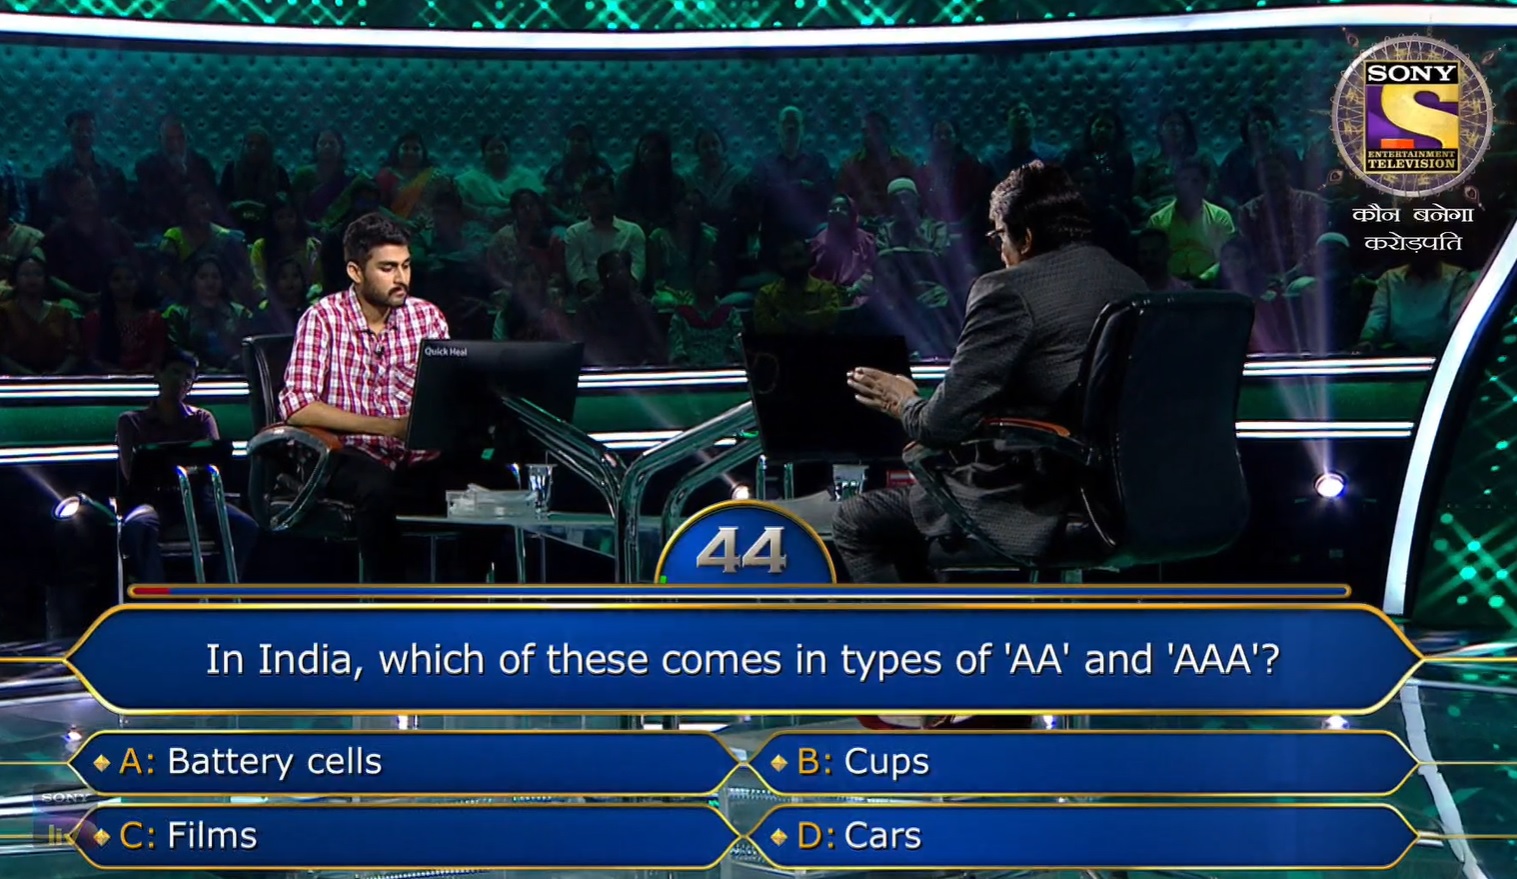 Ques : In India, which of these comes in types of ‘AA’ and ‘AAA’?